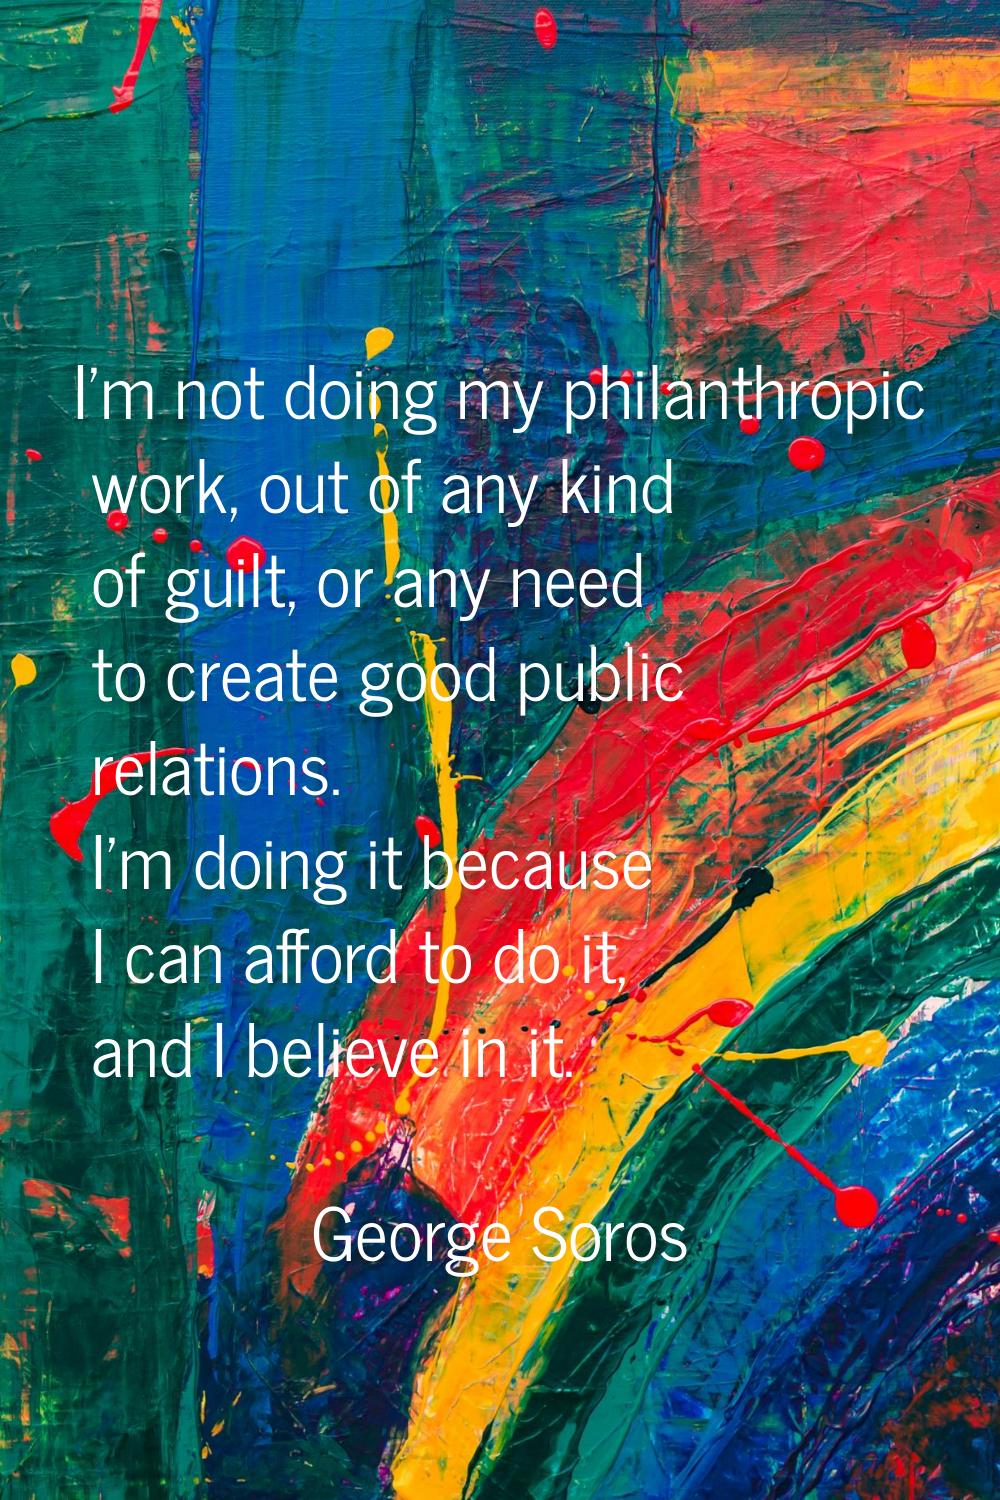 I'm not doing my philanthropic work, out of any kind of guilt, or any need to create good public re